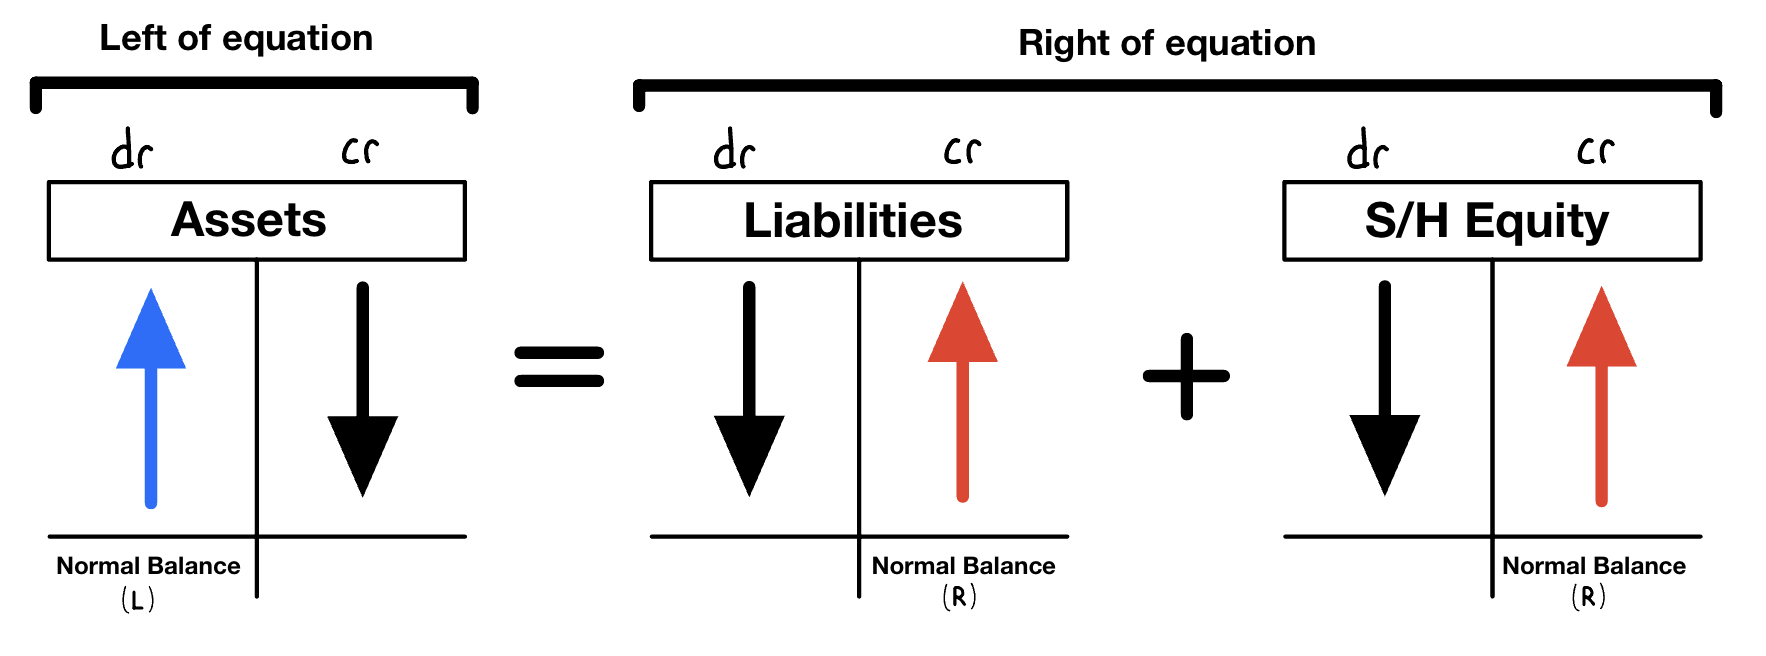 Assets are on the left side of the accounting equation, so their normal balance is on the left on the T-account (debit). Liabilities and S/H Equity are on the right side of the accounting equation, so they increase on the right side of the T-account (credit)